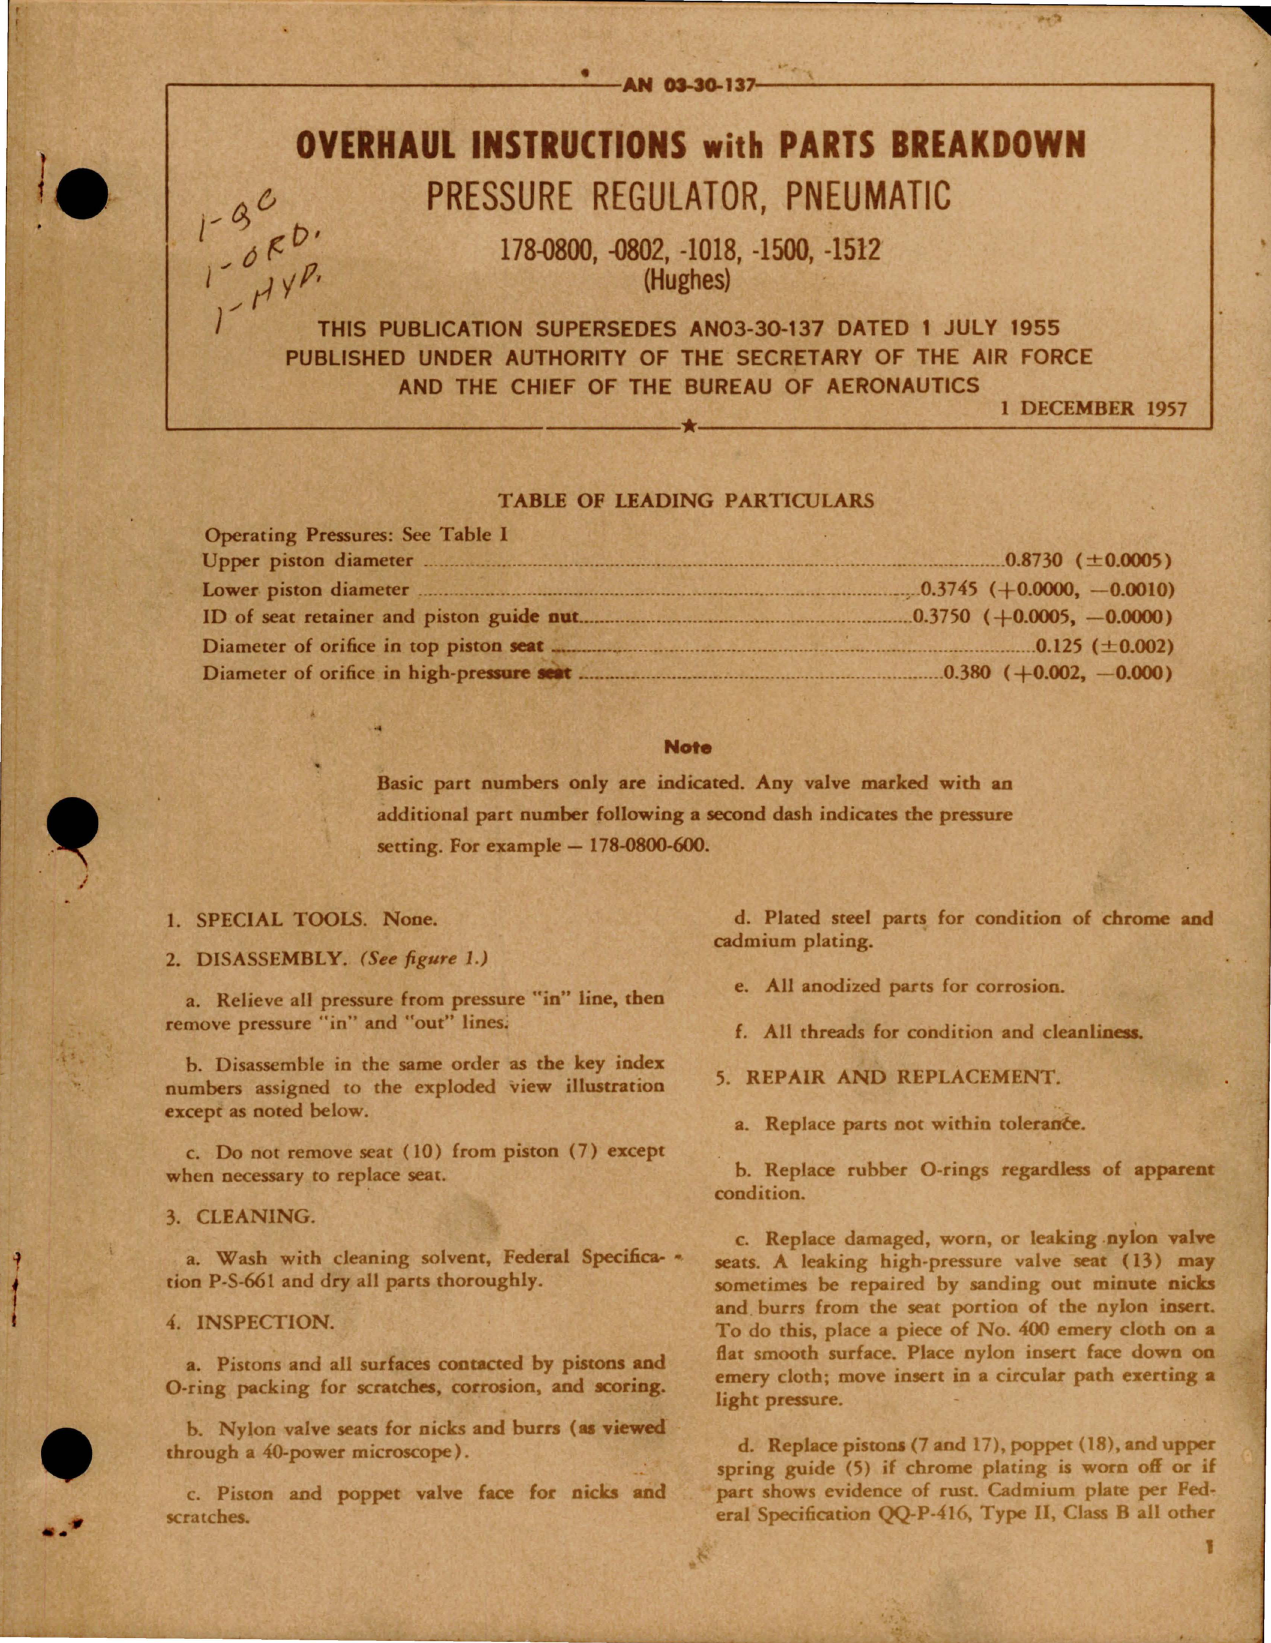 Sample page 1 from AirCorps Library document: Overhaul Instructions with Parts Breakdown for Pneumatic Pressure Regulator - 178-0800, 178-0802, 178-1018, 178-1500 and 178-1512